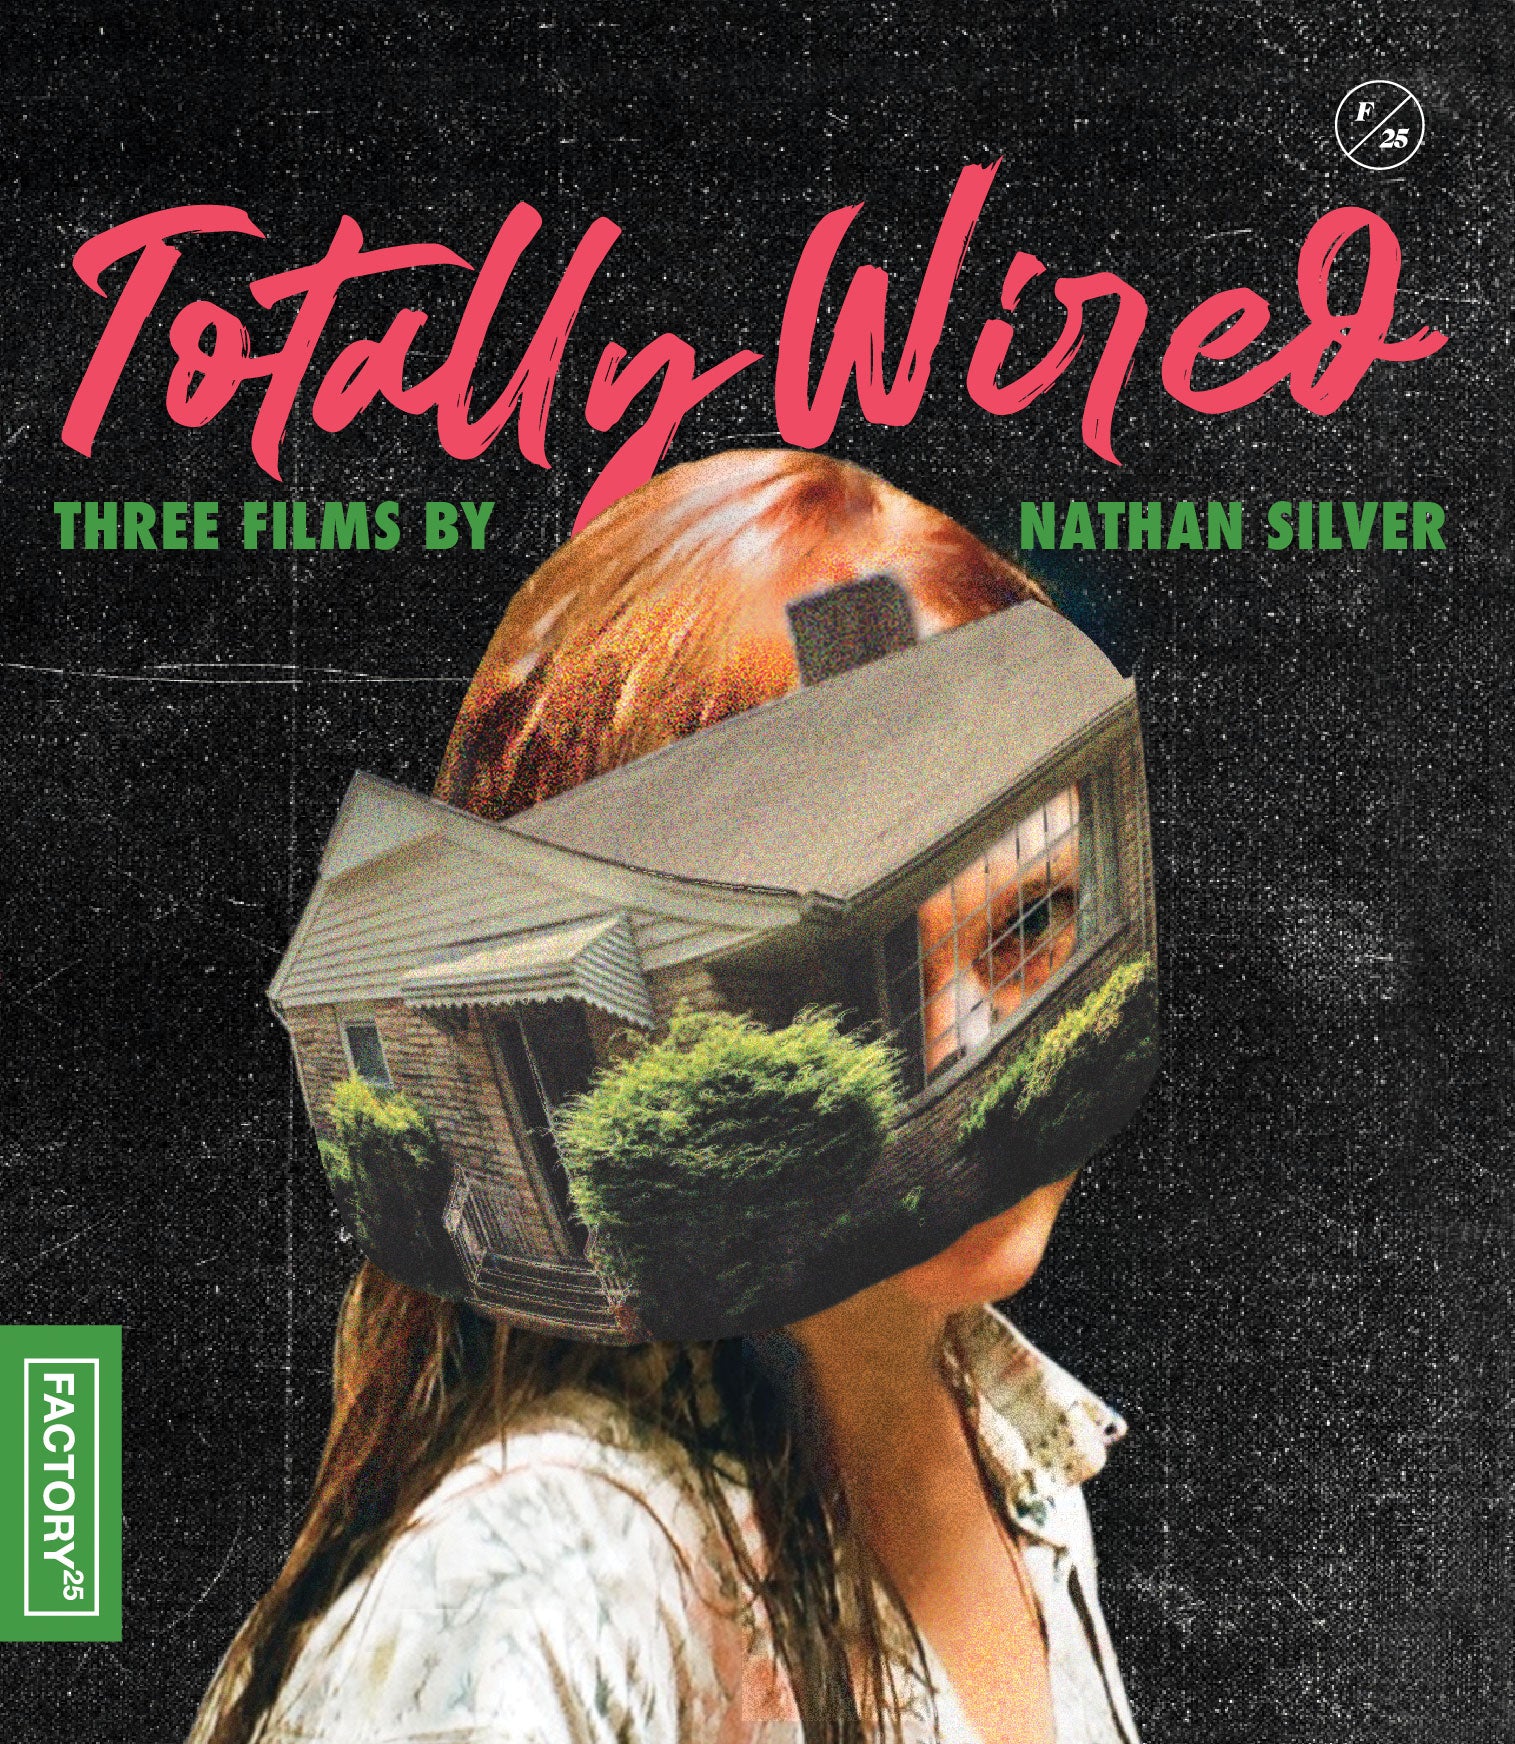 TOTALLY WIRED: THREE FILMS BY NATHAN SILVER (LIMITED EDITION) BLU-RAY